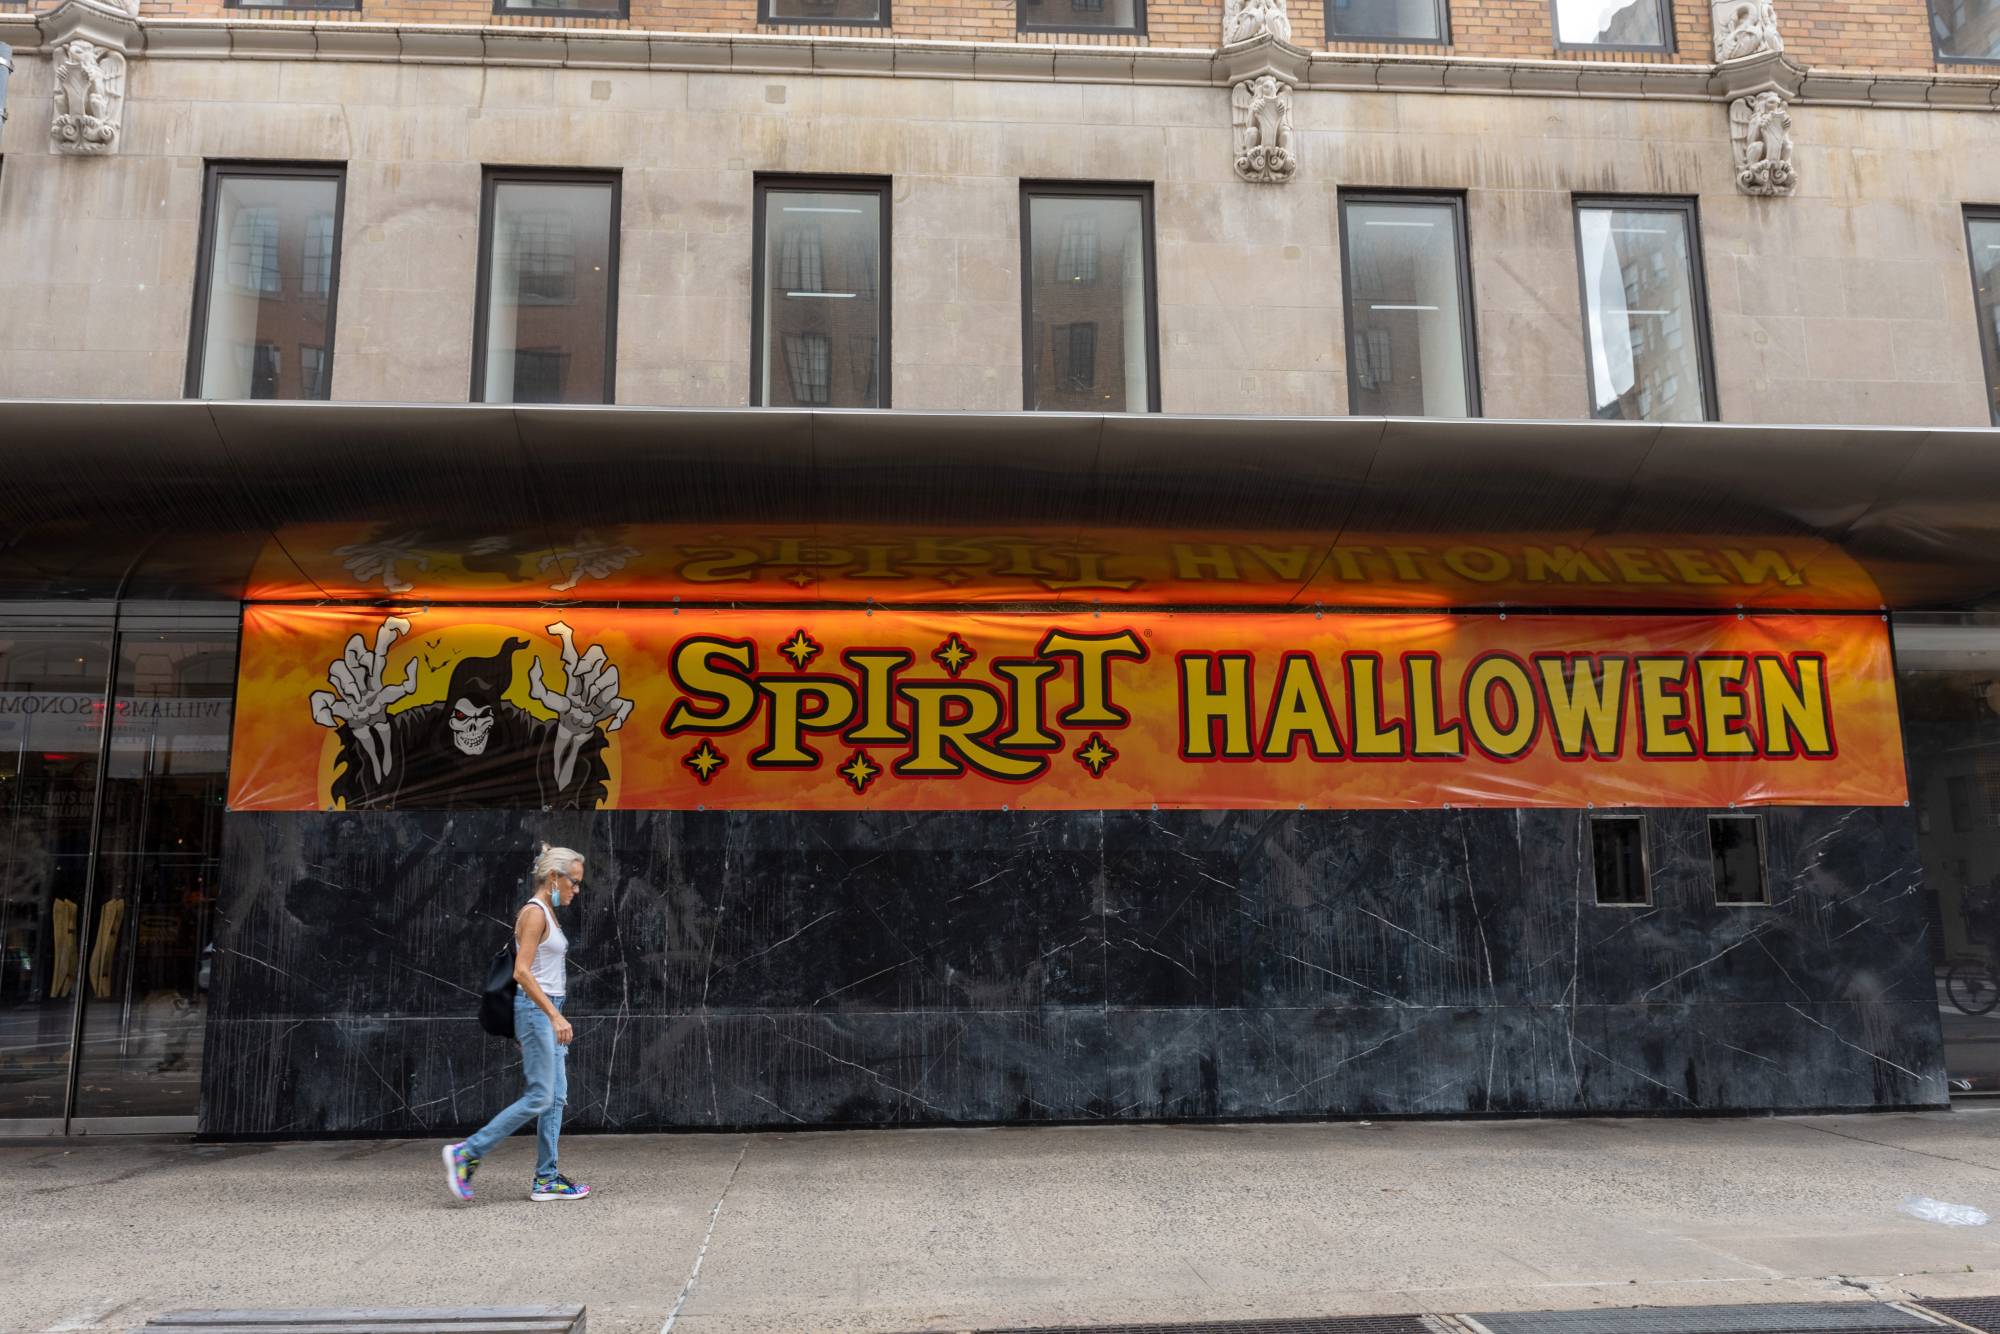 Spirit Halloween retail store, which inspired the 'Spirit Halloween' movie. A person passes in front of the temporary store sign.